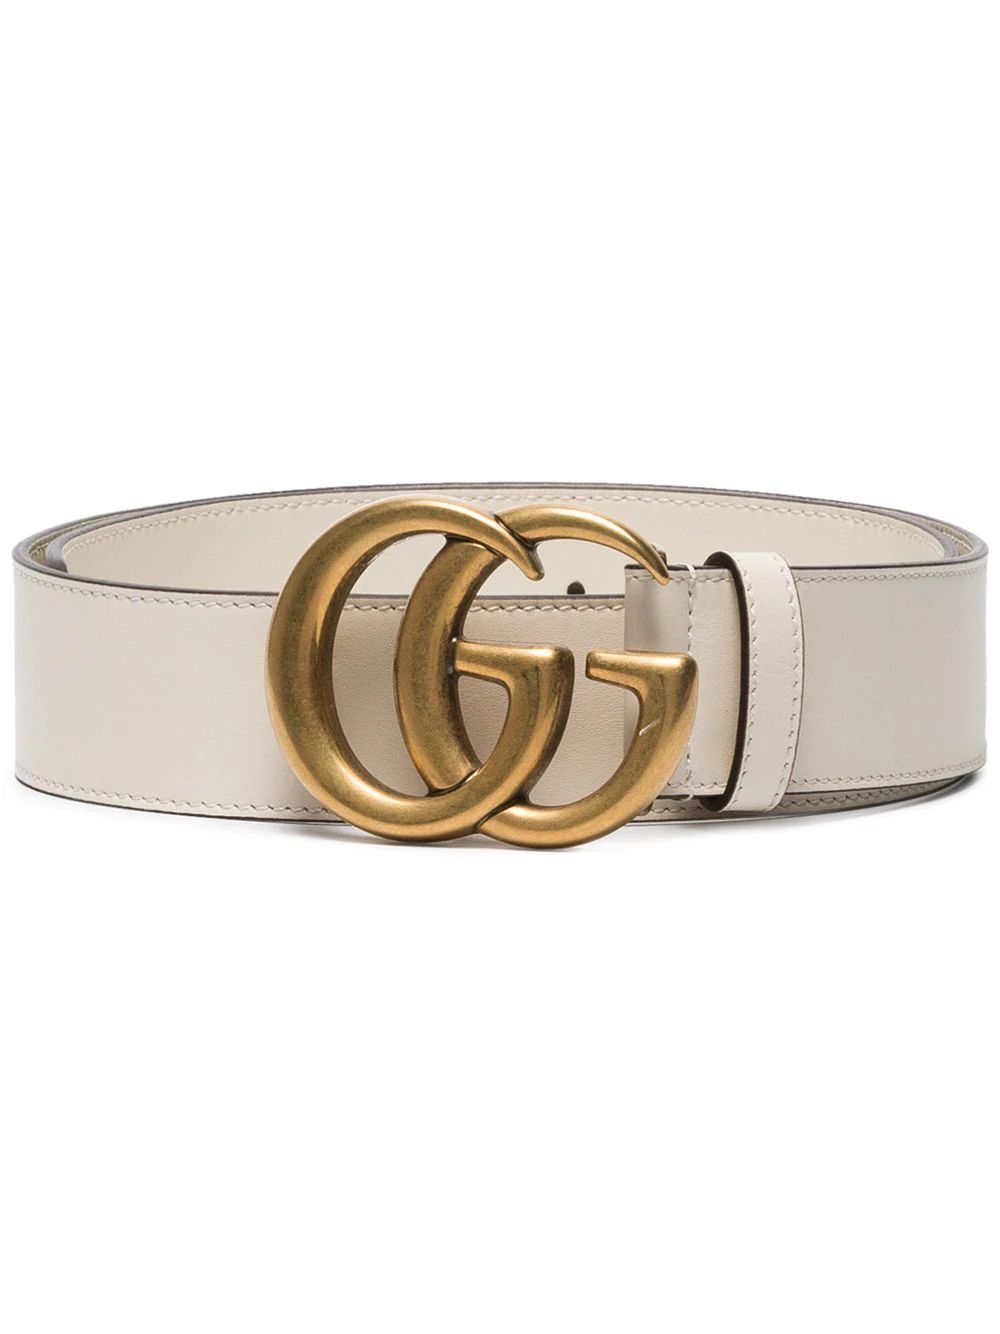 Gucci white Leather belt with Double G buckle | FarFetch US